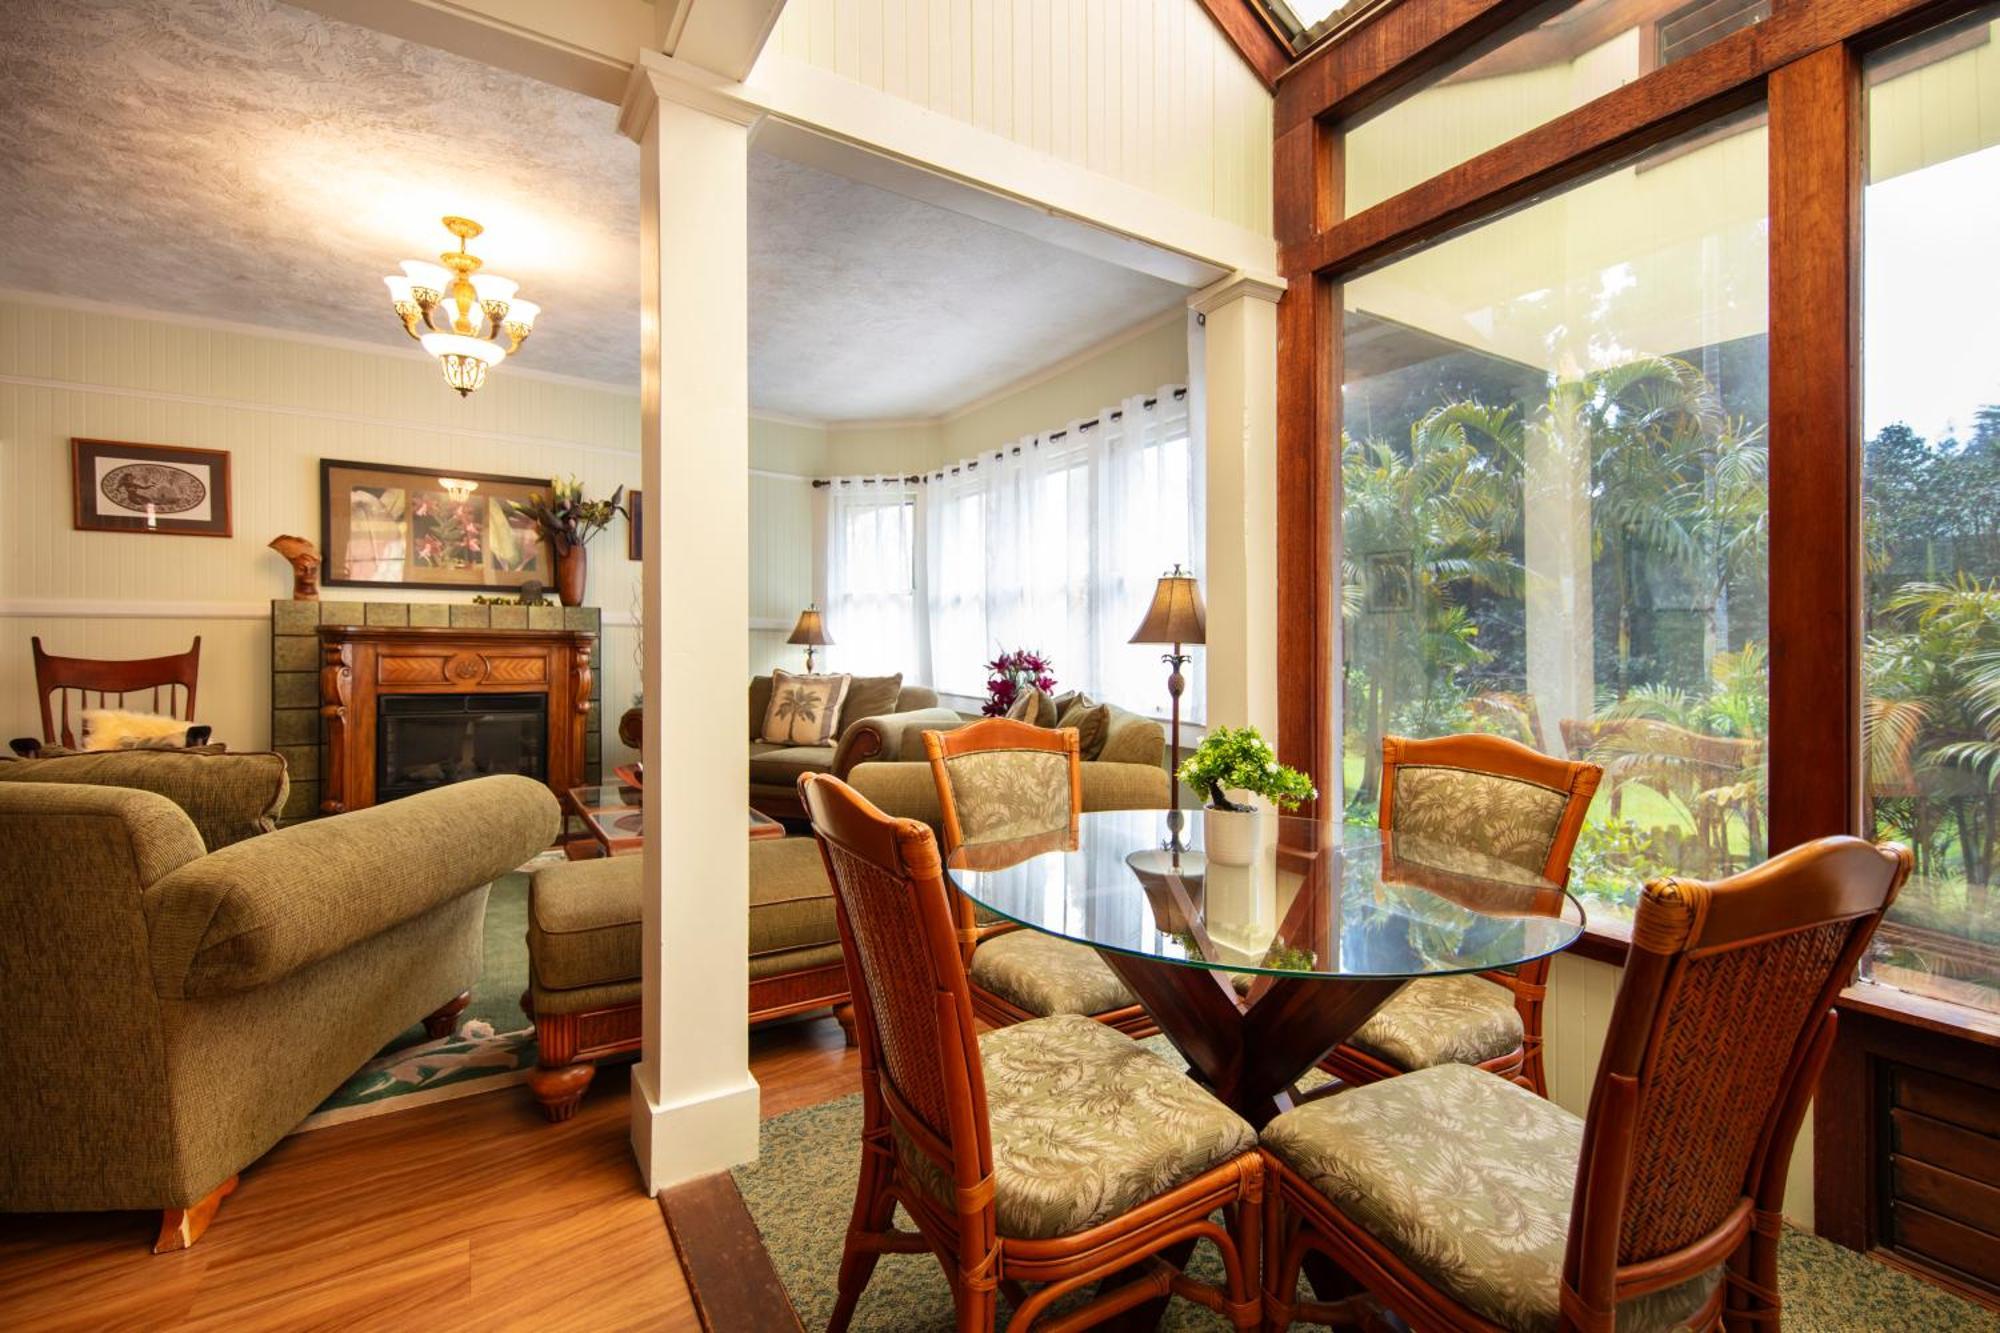 Aloha Junction Guest House - 5 Min From Hawaii Volcanoes National Park Bagian luar foto